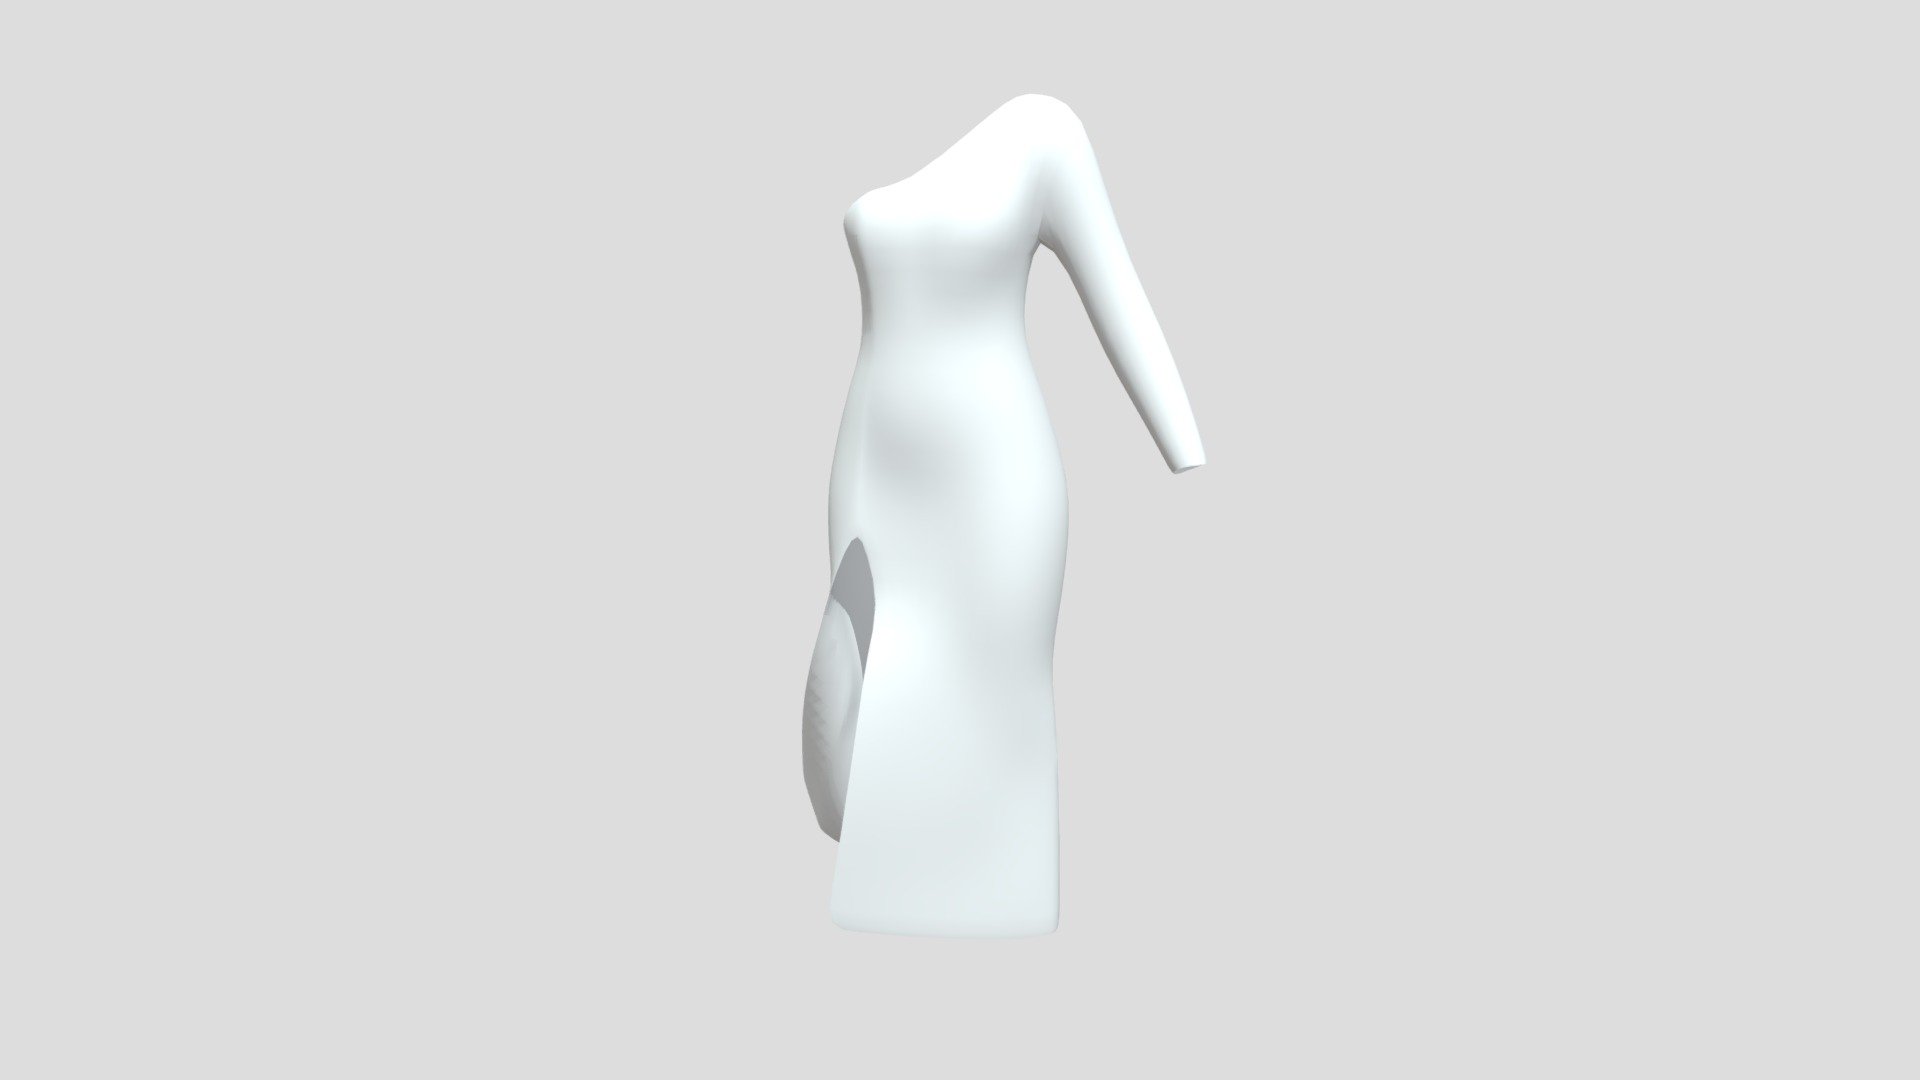 A dress one shoulder for a female character - Dress One Shoulder - Download Free 3D model by SayuriCreatesStuff (@sayuriauthor) 3d model